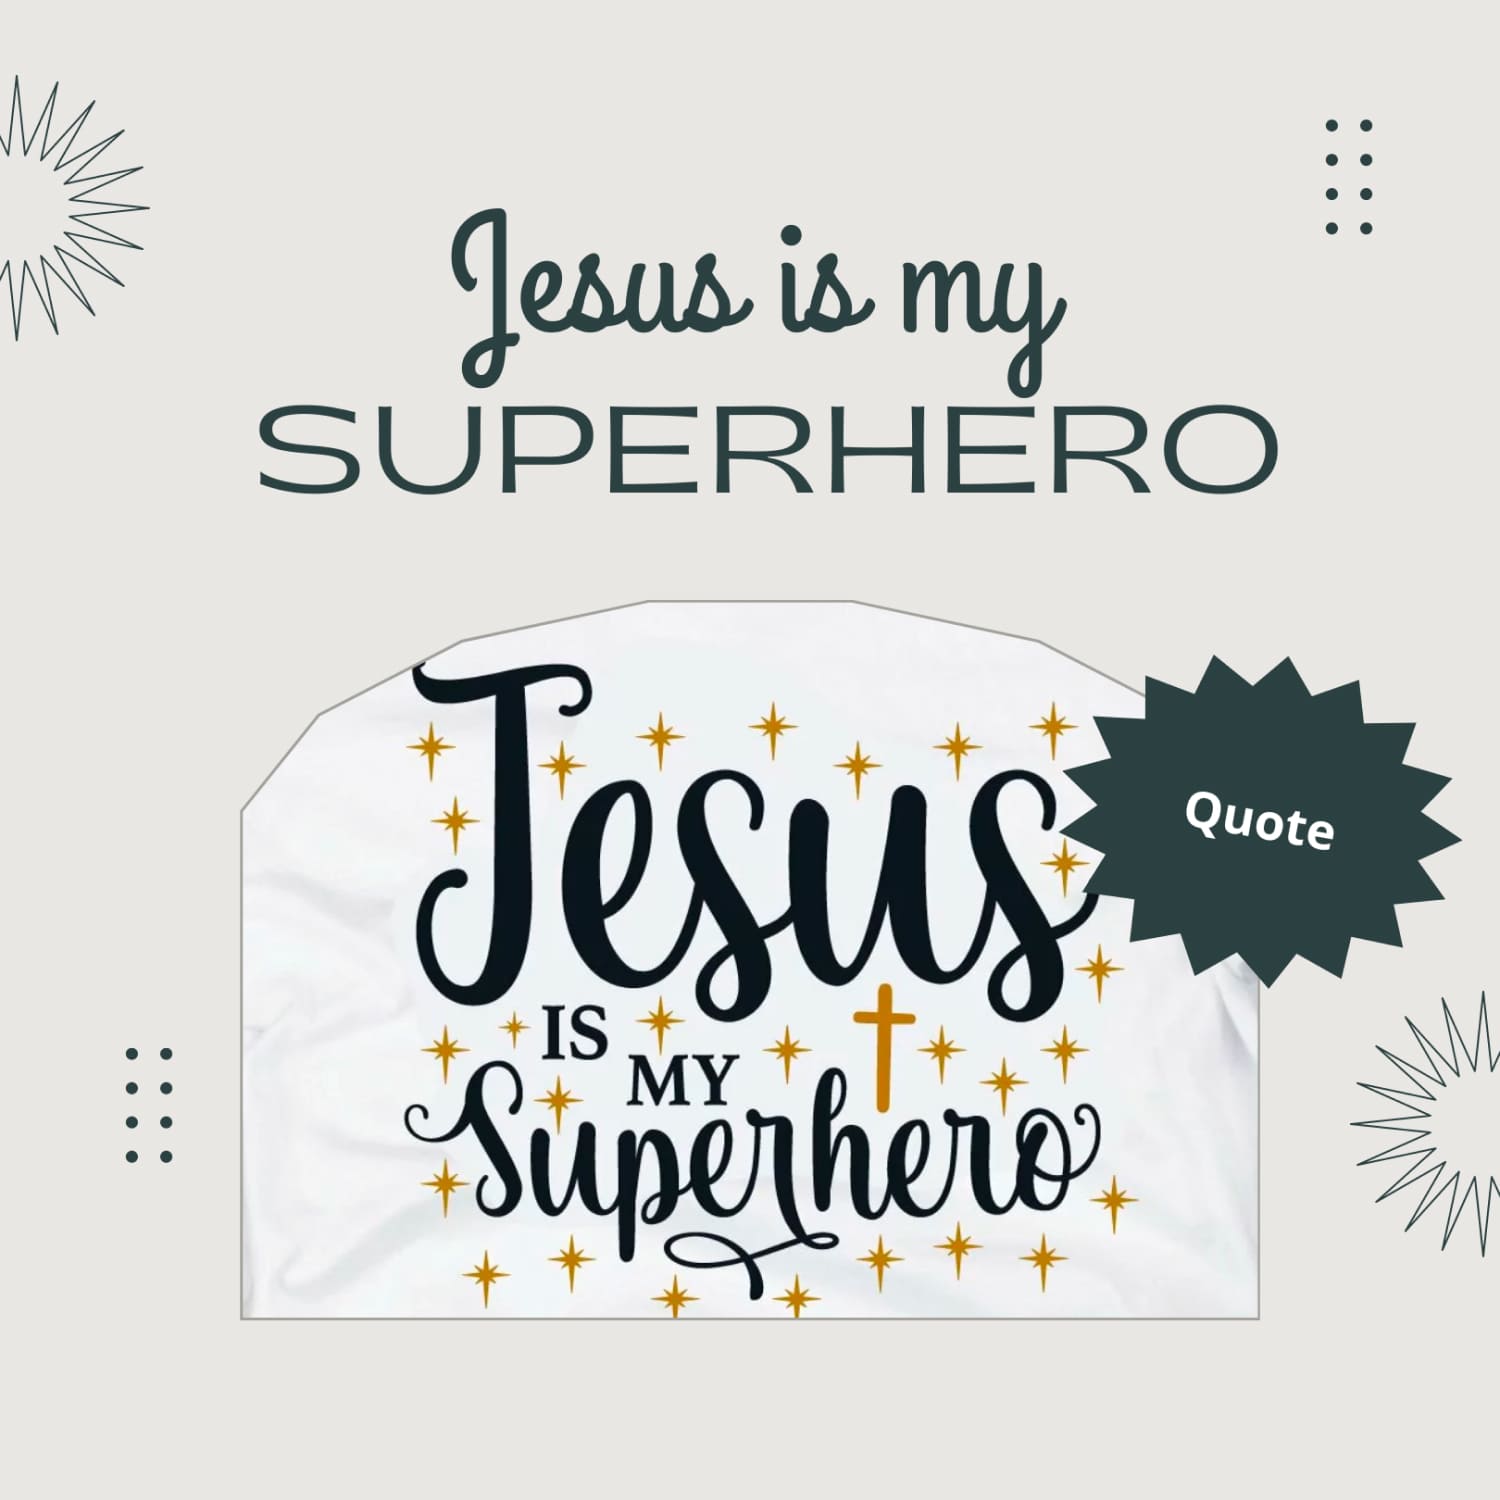 Jesus is my superhero, first picture 1500x1500.